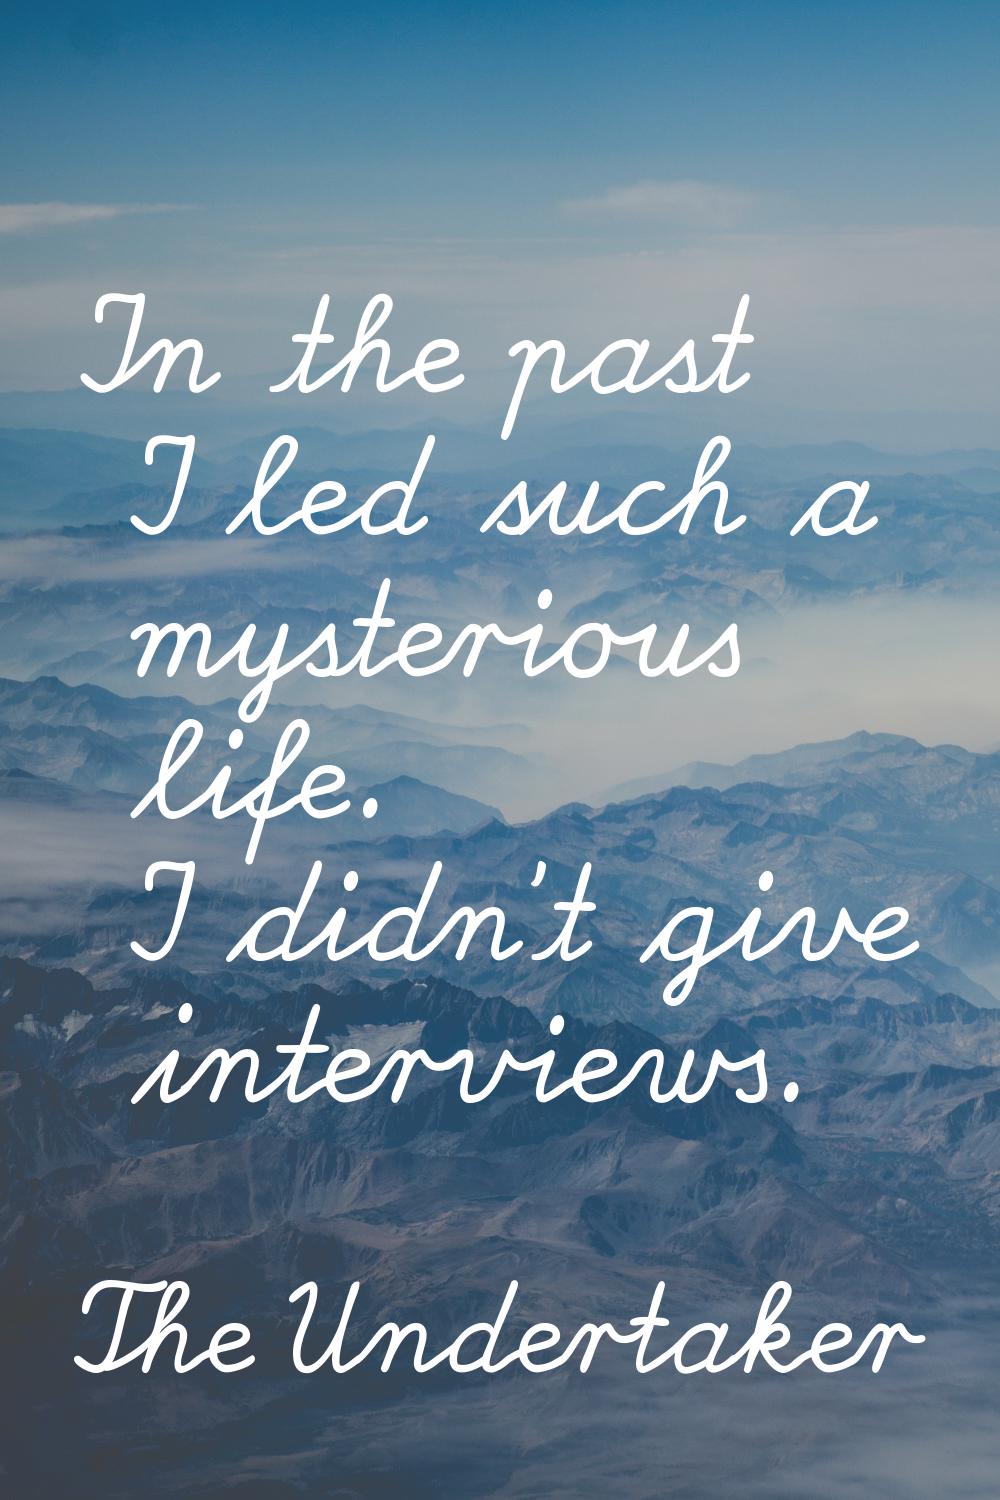 In the past I led such a mysterious life. I didn't give interviews.